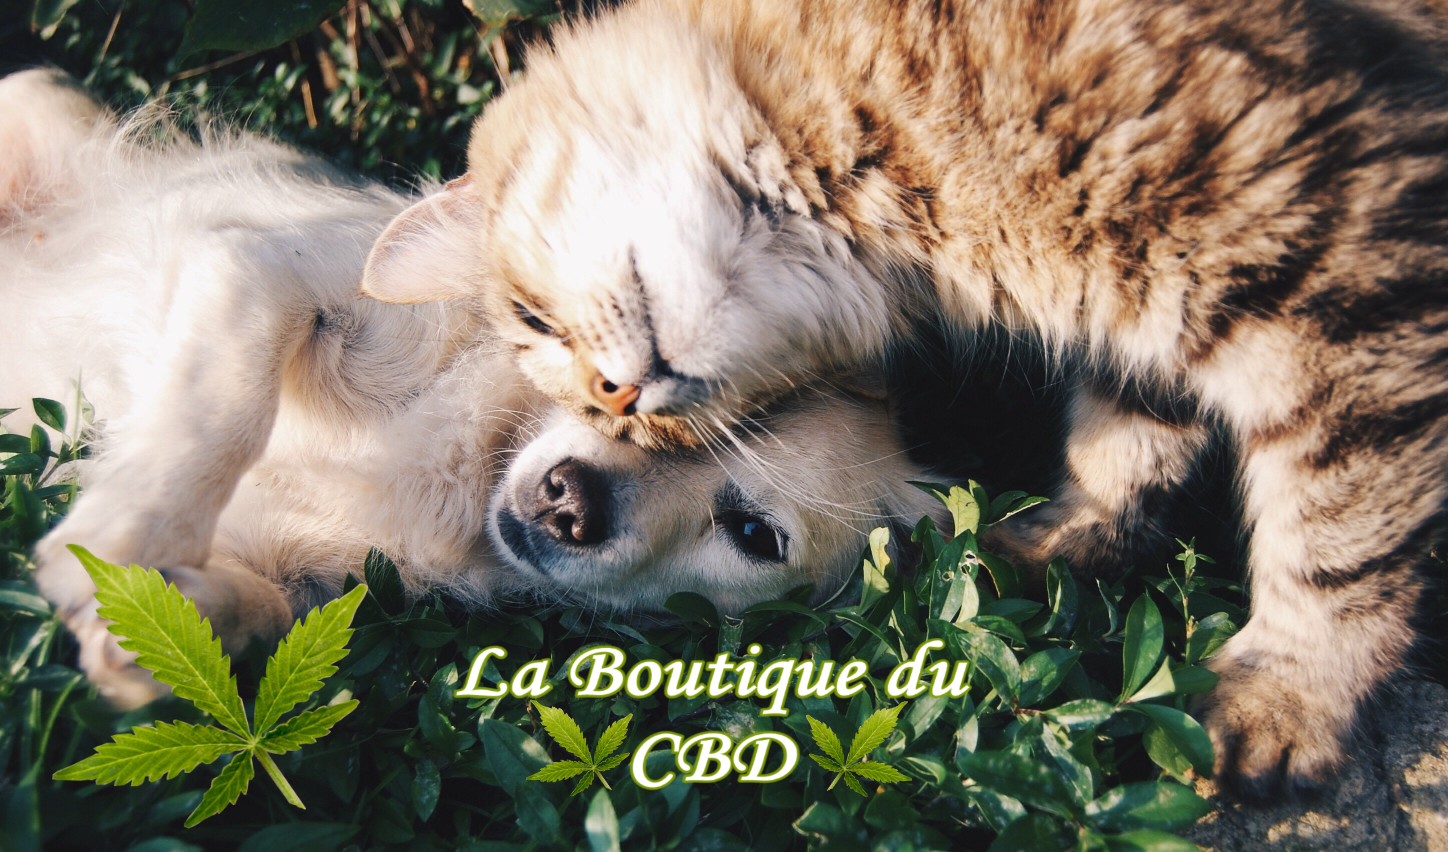 HUILE CBD POUR ANIMAUX GERMIGNY-SOUS-COULOMBS 77